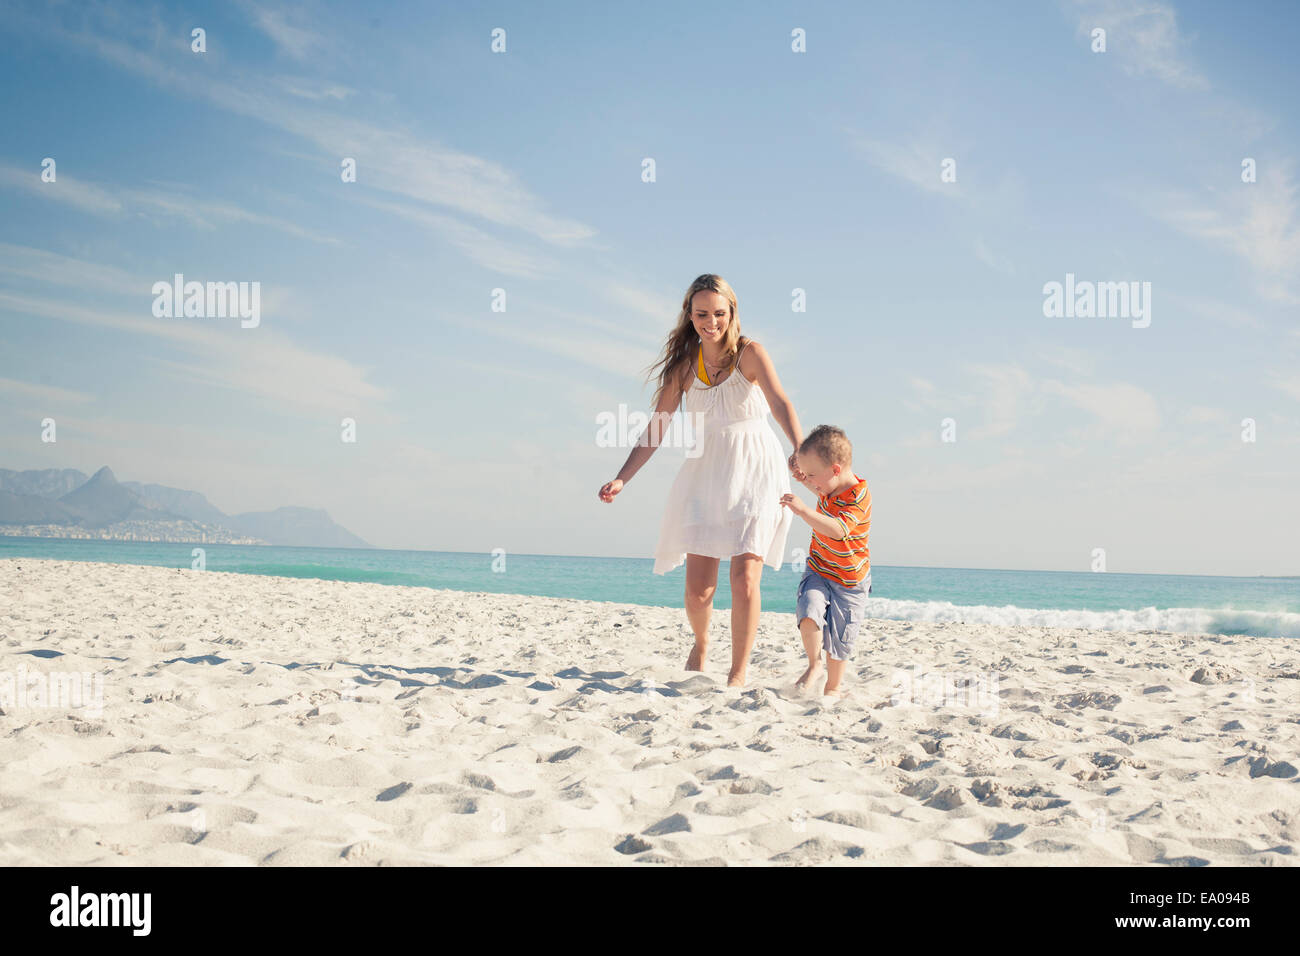 Boy running and pulling mother on beach, Cape Town, Western Cape, South Africa Stock Photo